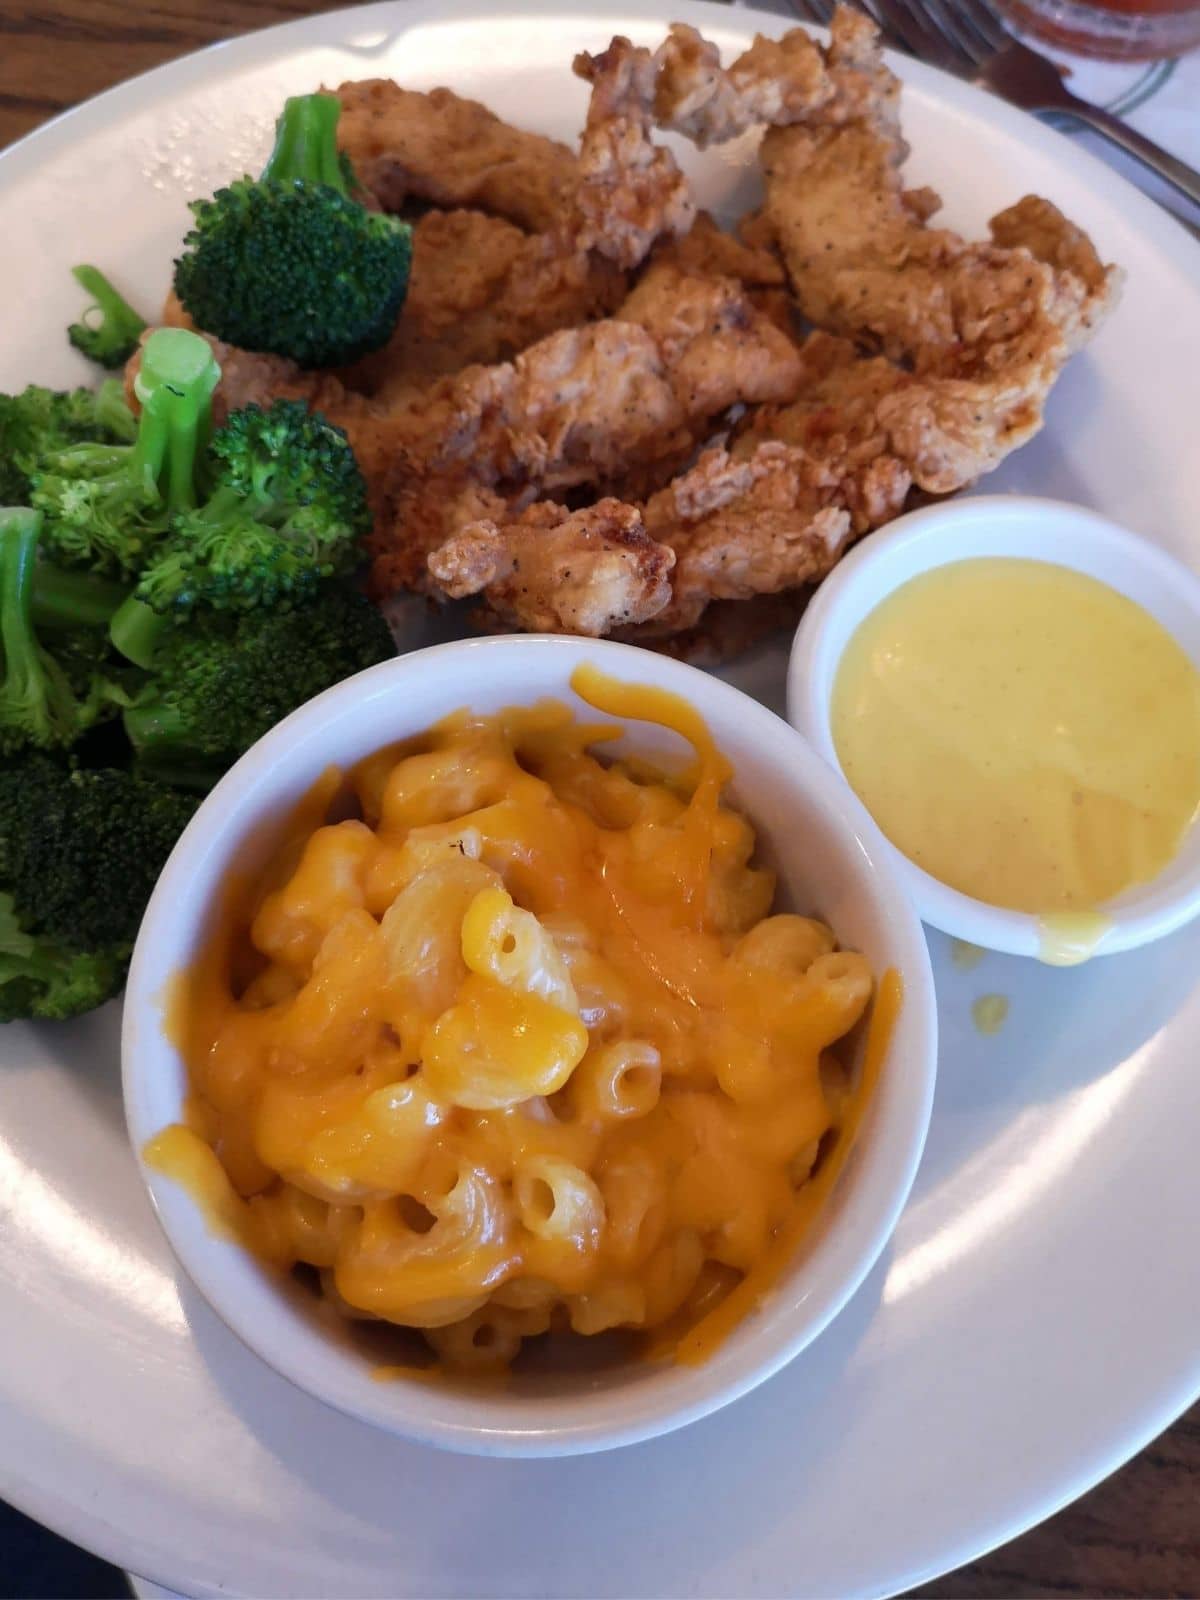 A plate of broccoli, chicken fingers, mac and cheese and a little dish of honey mustard dipping sauce.